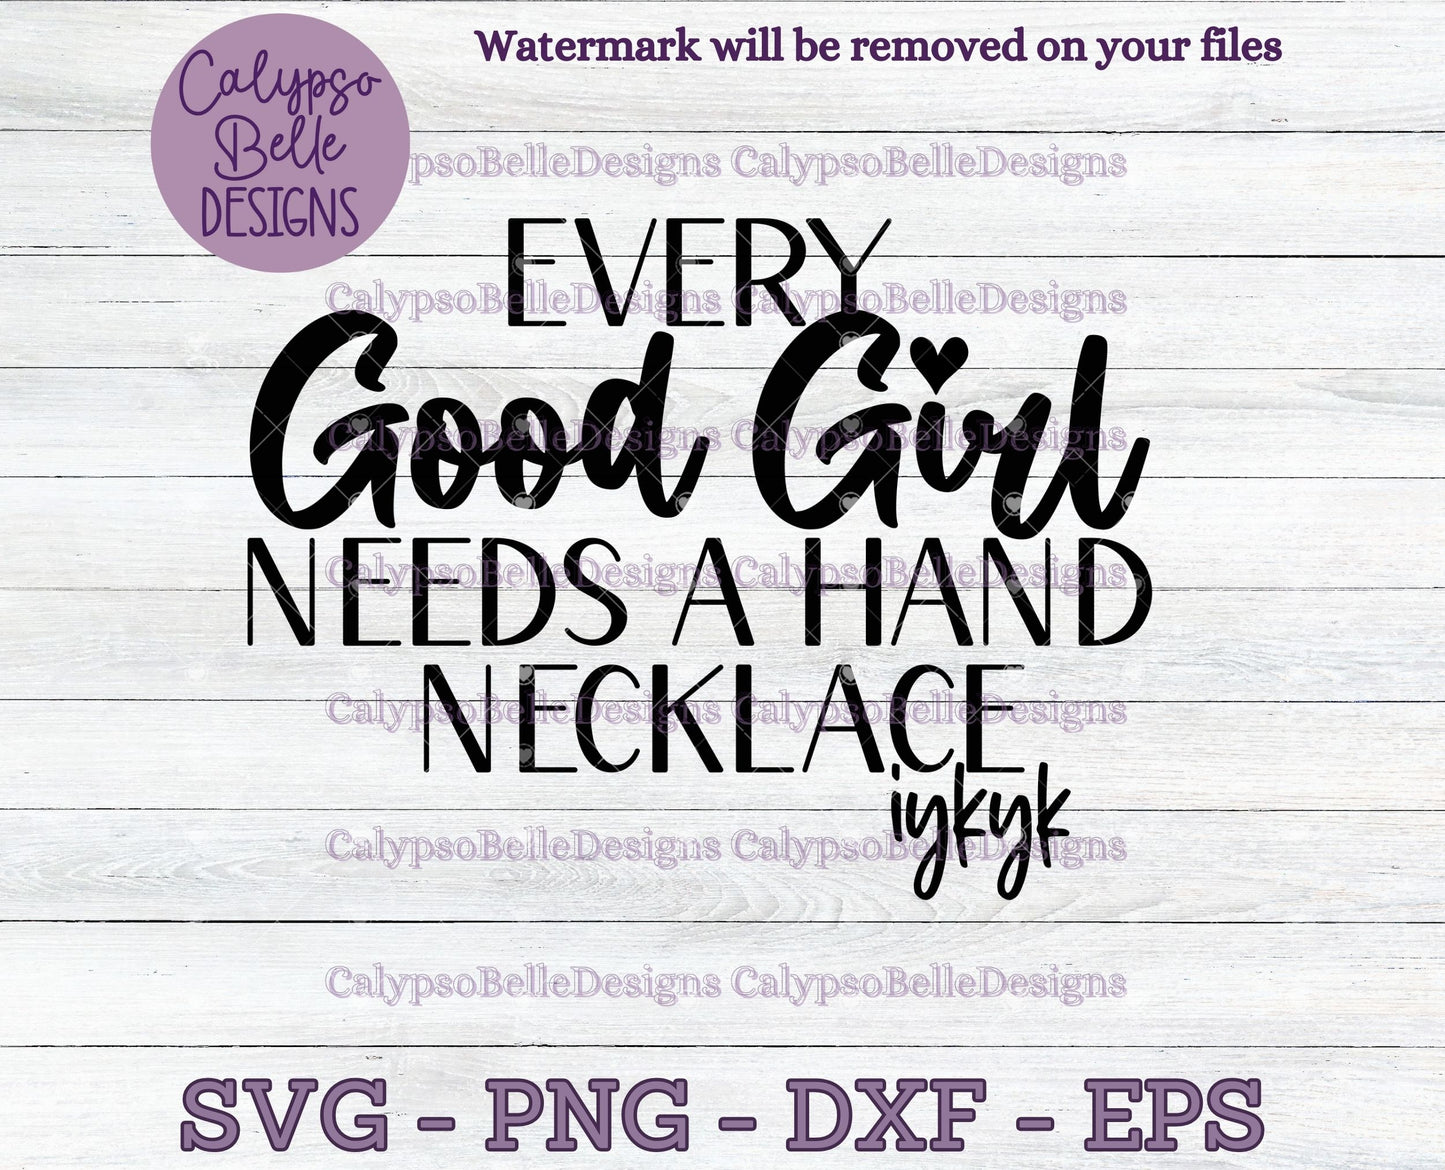 Every Good Girl Needs a Hand Necklace Design